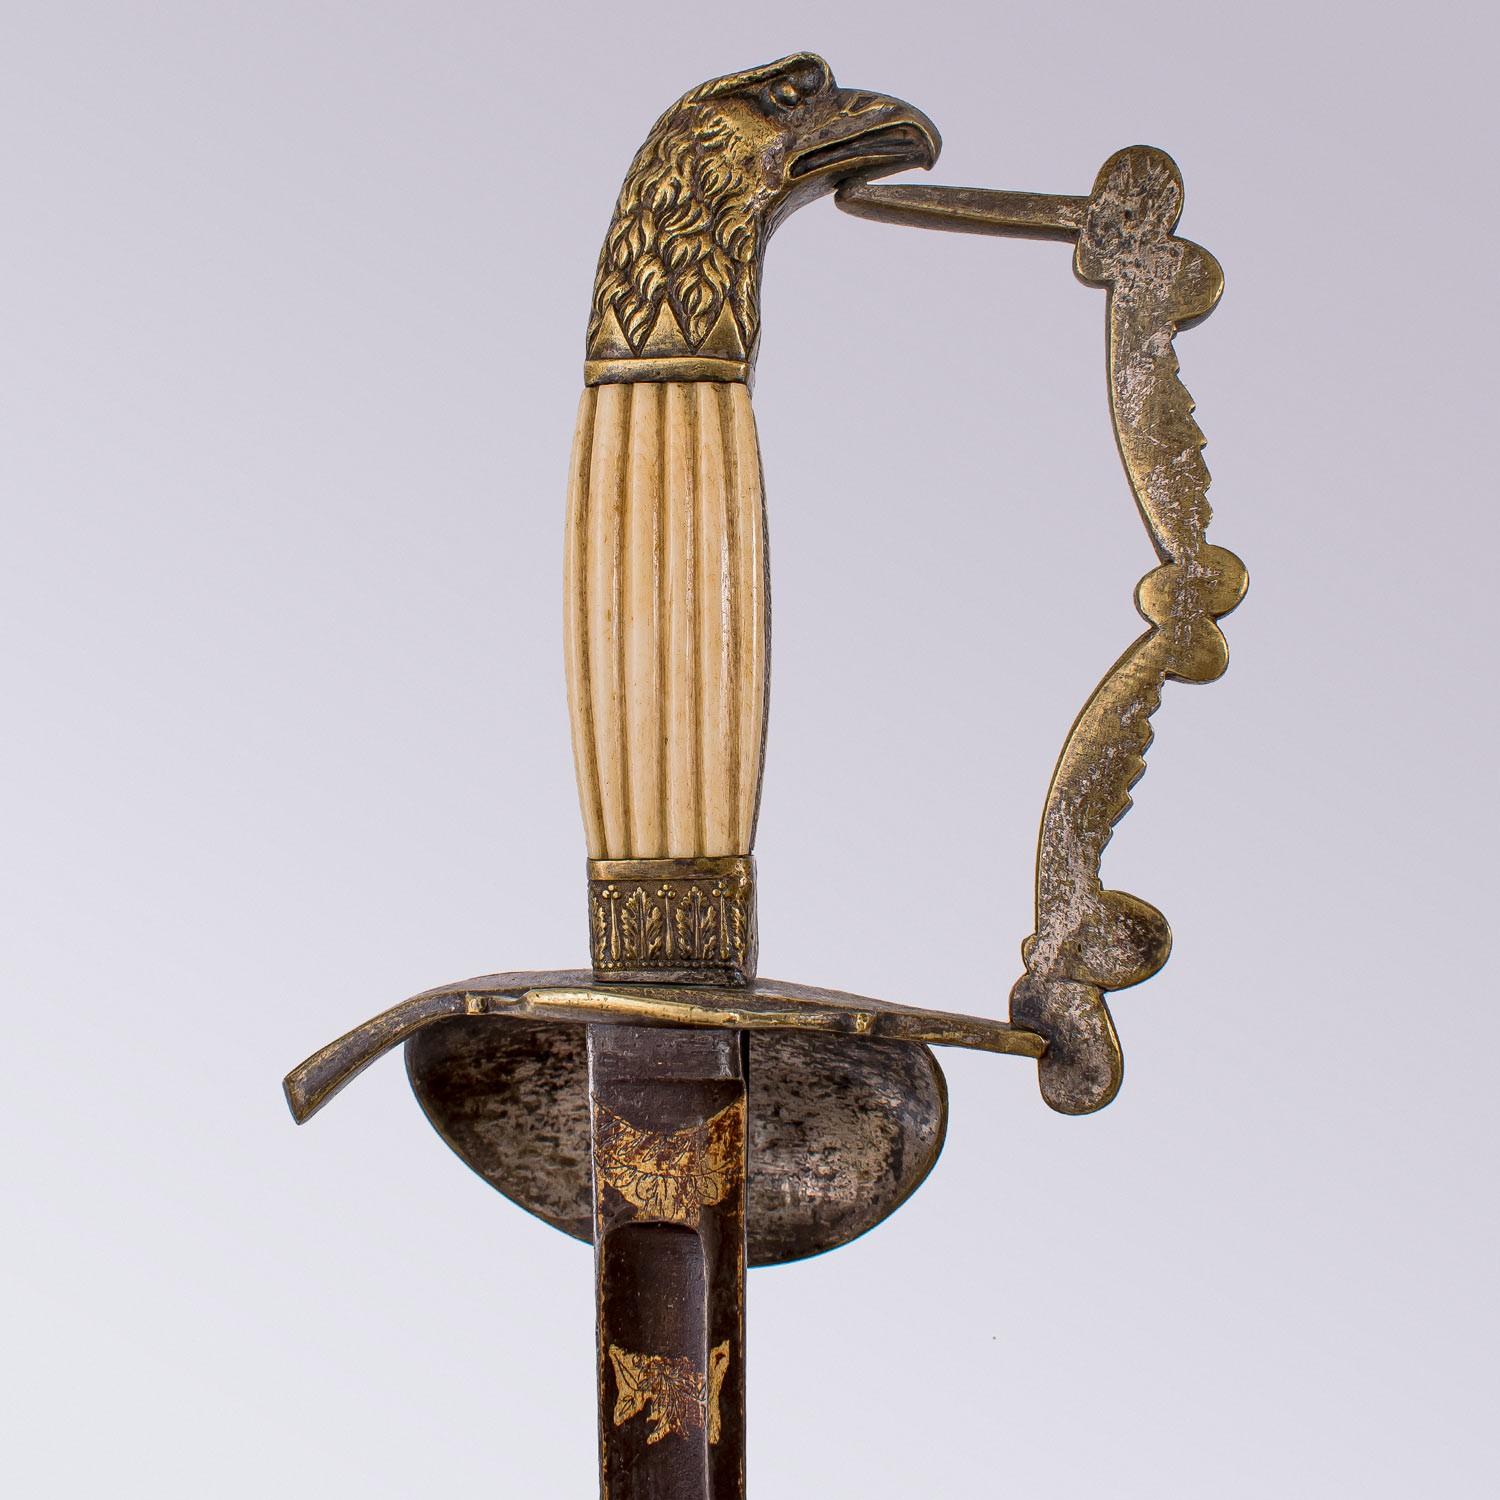 This is a very rare American Officer's sword that dates back to the period before the American Civil War.

The sword has a 79cm straight blade with a flat back, counter-edged and gutter with a patina and gilded engravings on the third. The initials